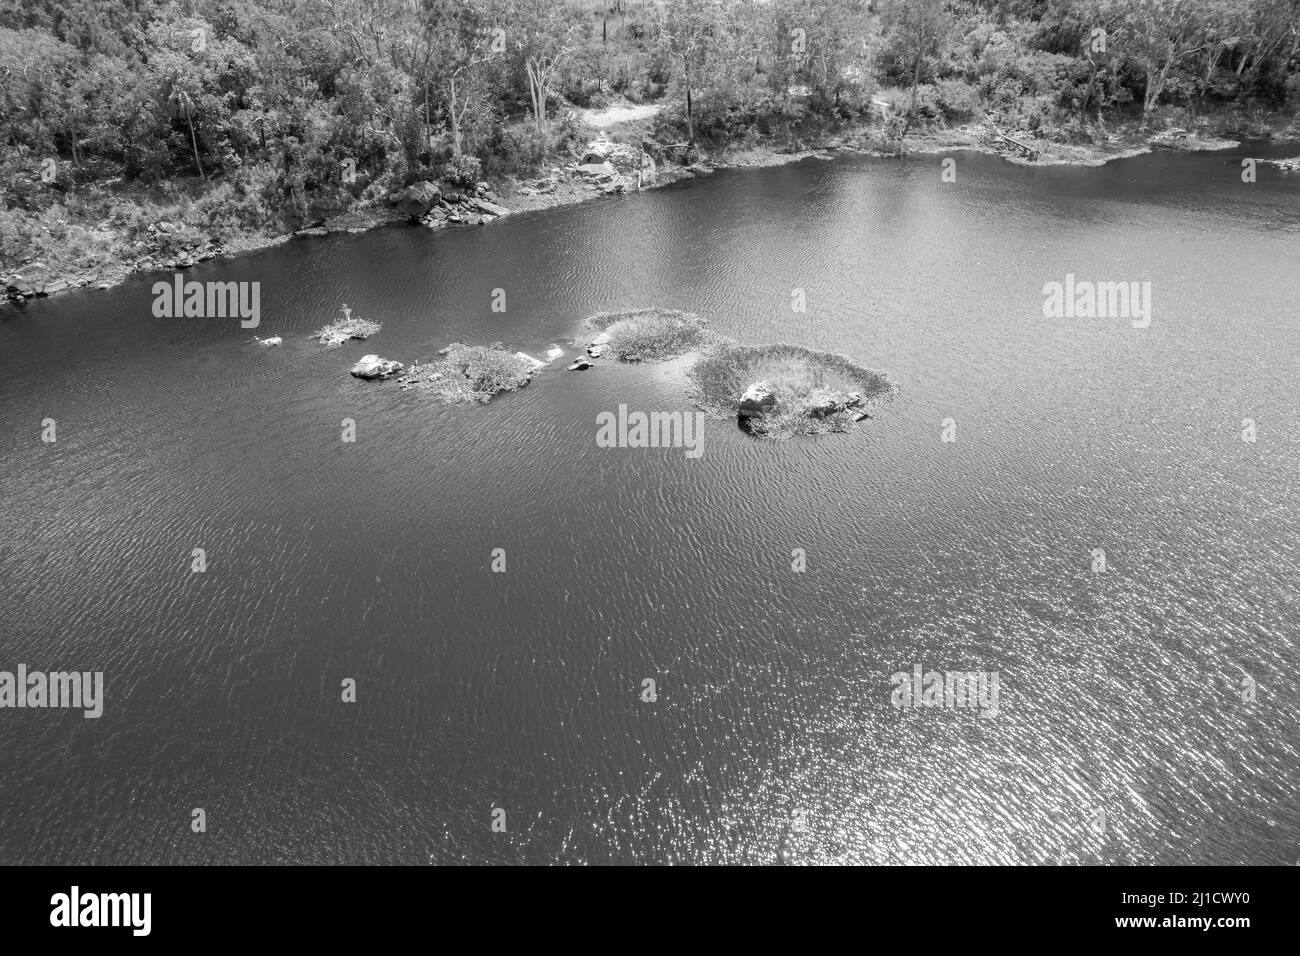 Rocks in the middle of a dammed river covered in green vegetation. Dumbleton Weir, Mackay, Queensland, Australia. Monotone image. Stock Photo